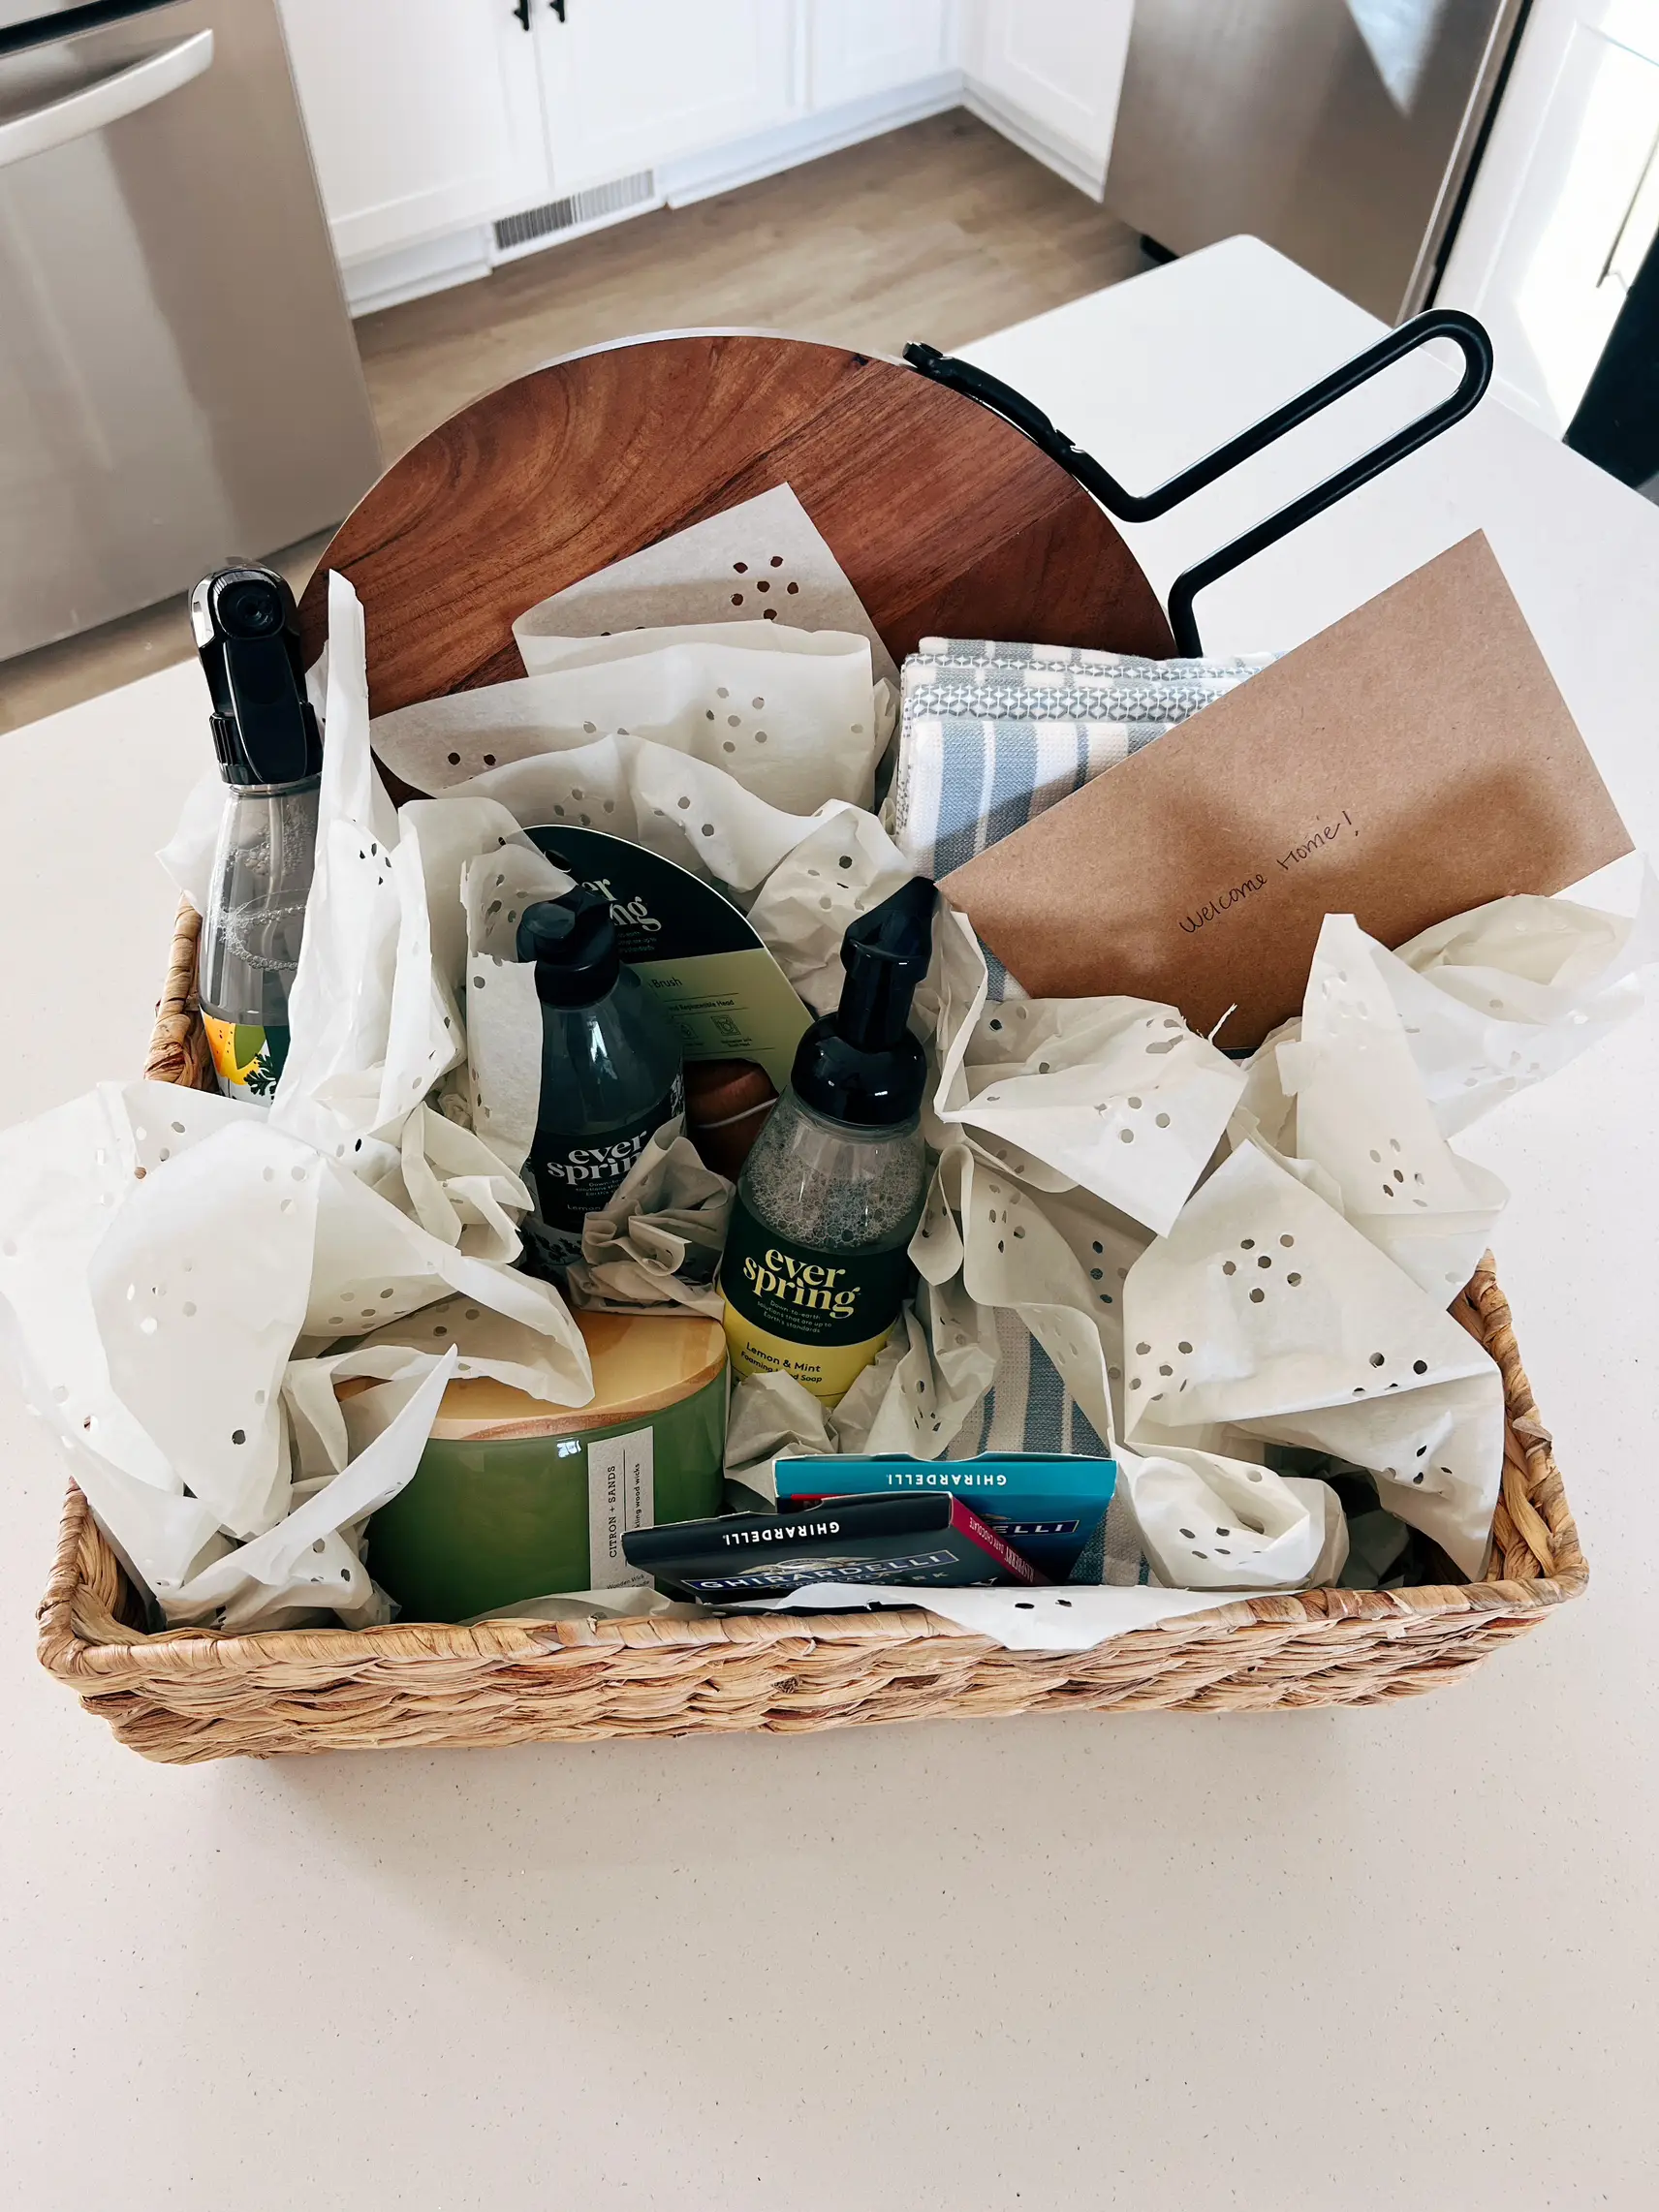 Send Housewarming Gifts & Baskets to people moving to New Home or New  Apartment